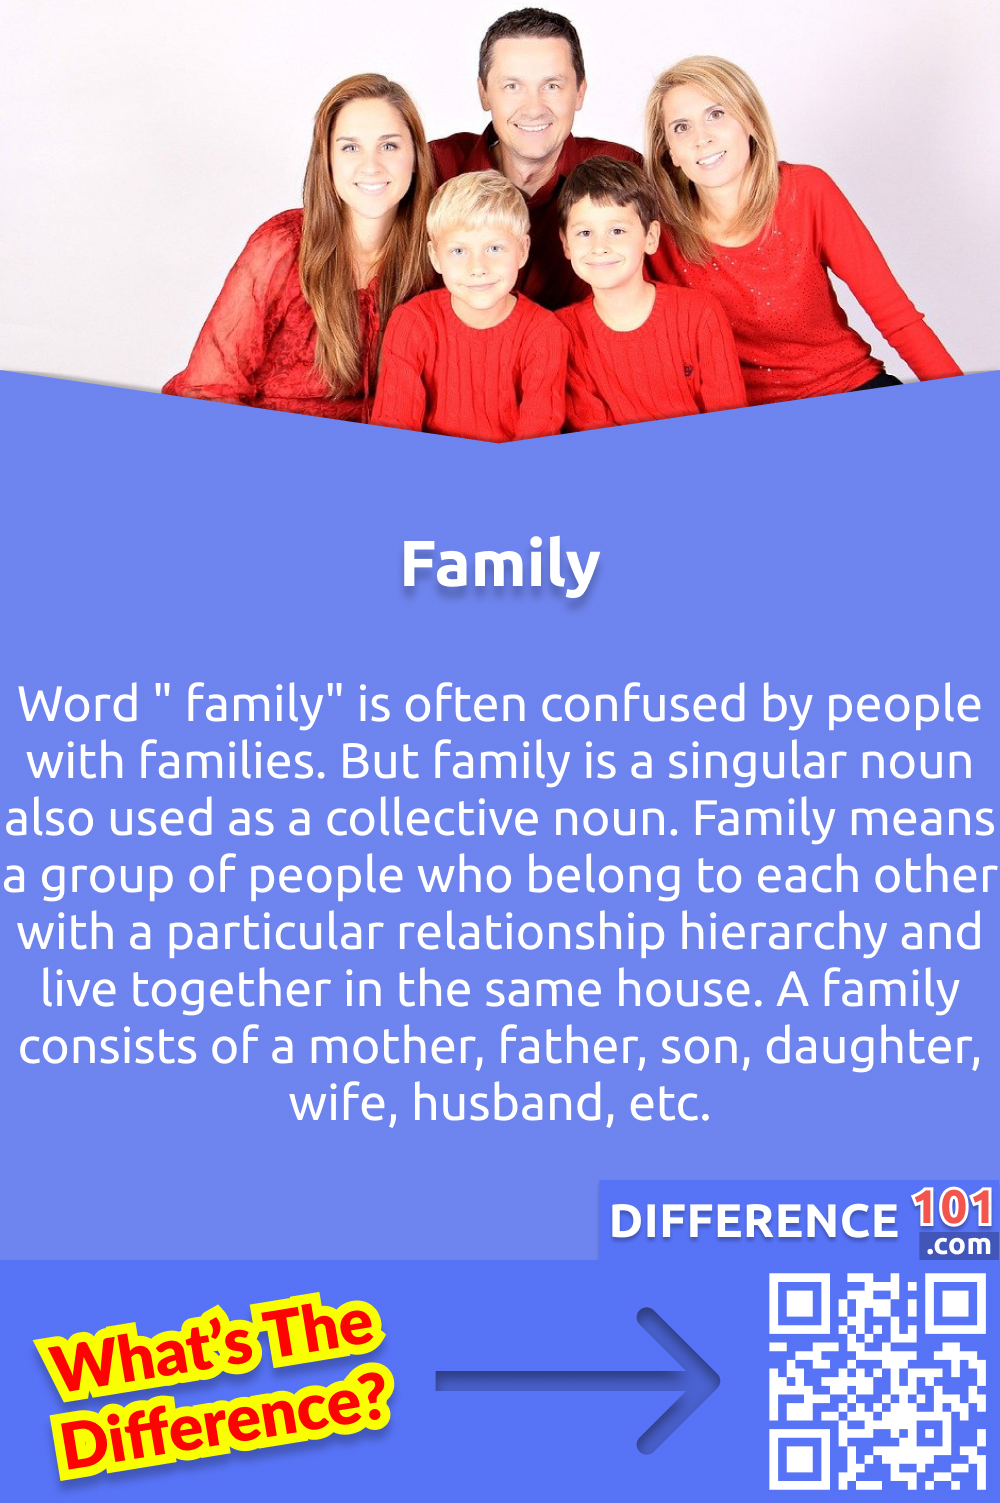 What is Family? Word " family" is often confused by people with families. But family is a singular noun also used as a collective noun. Family means a group of people who belong to each other with a particular relationship hierarchy and live together in the same house. A family consists of a mother, father, son, daughter, wife, husband, etc., for example, a boy named James. A group of people living with James and having different relations with him is considered his family. The family of James includes his mother, father, sister, brother, grandparents, etc. These people belong to a common household and share a relationship as a "family."